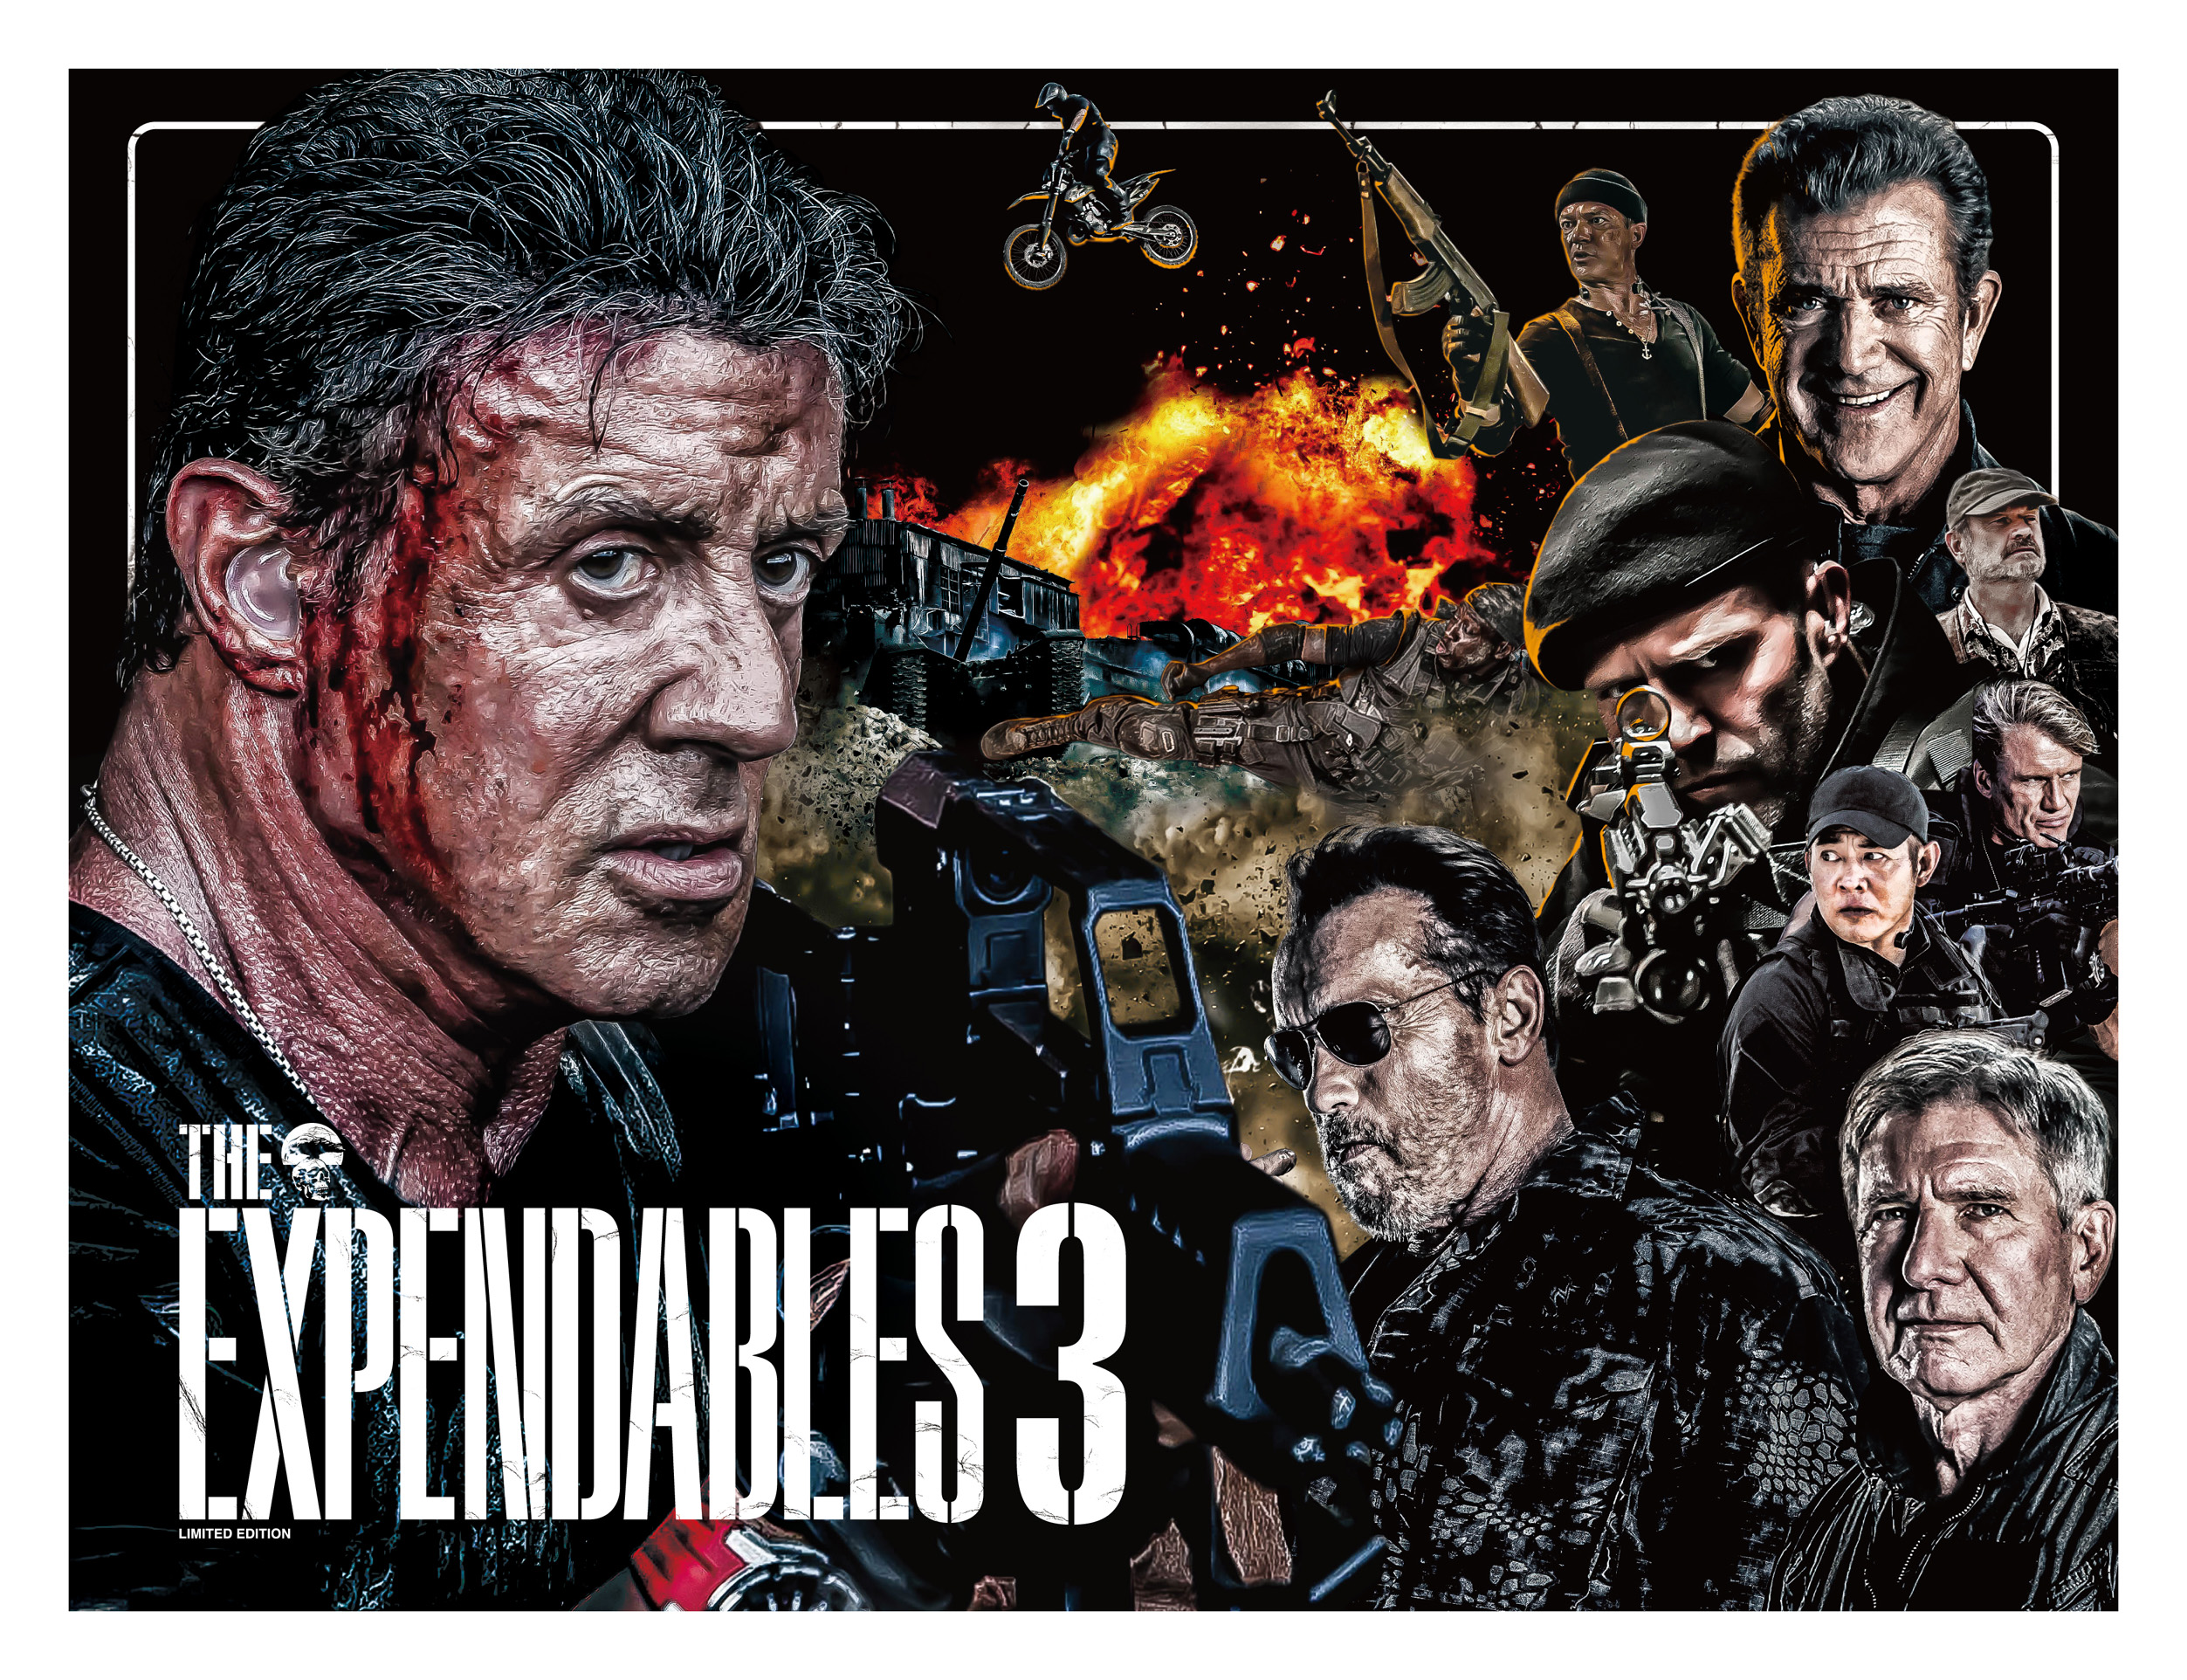 THE EXPENDABLES 3 劇場パンフレット表紙デザイン